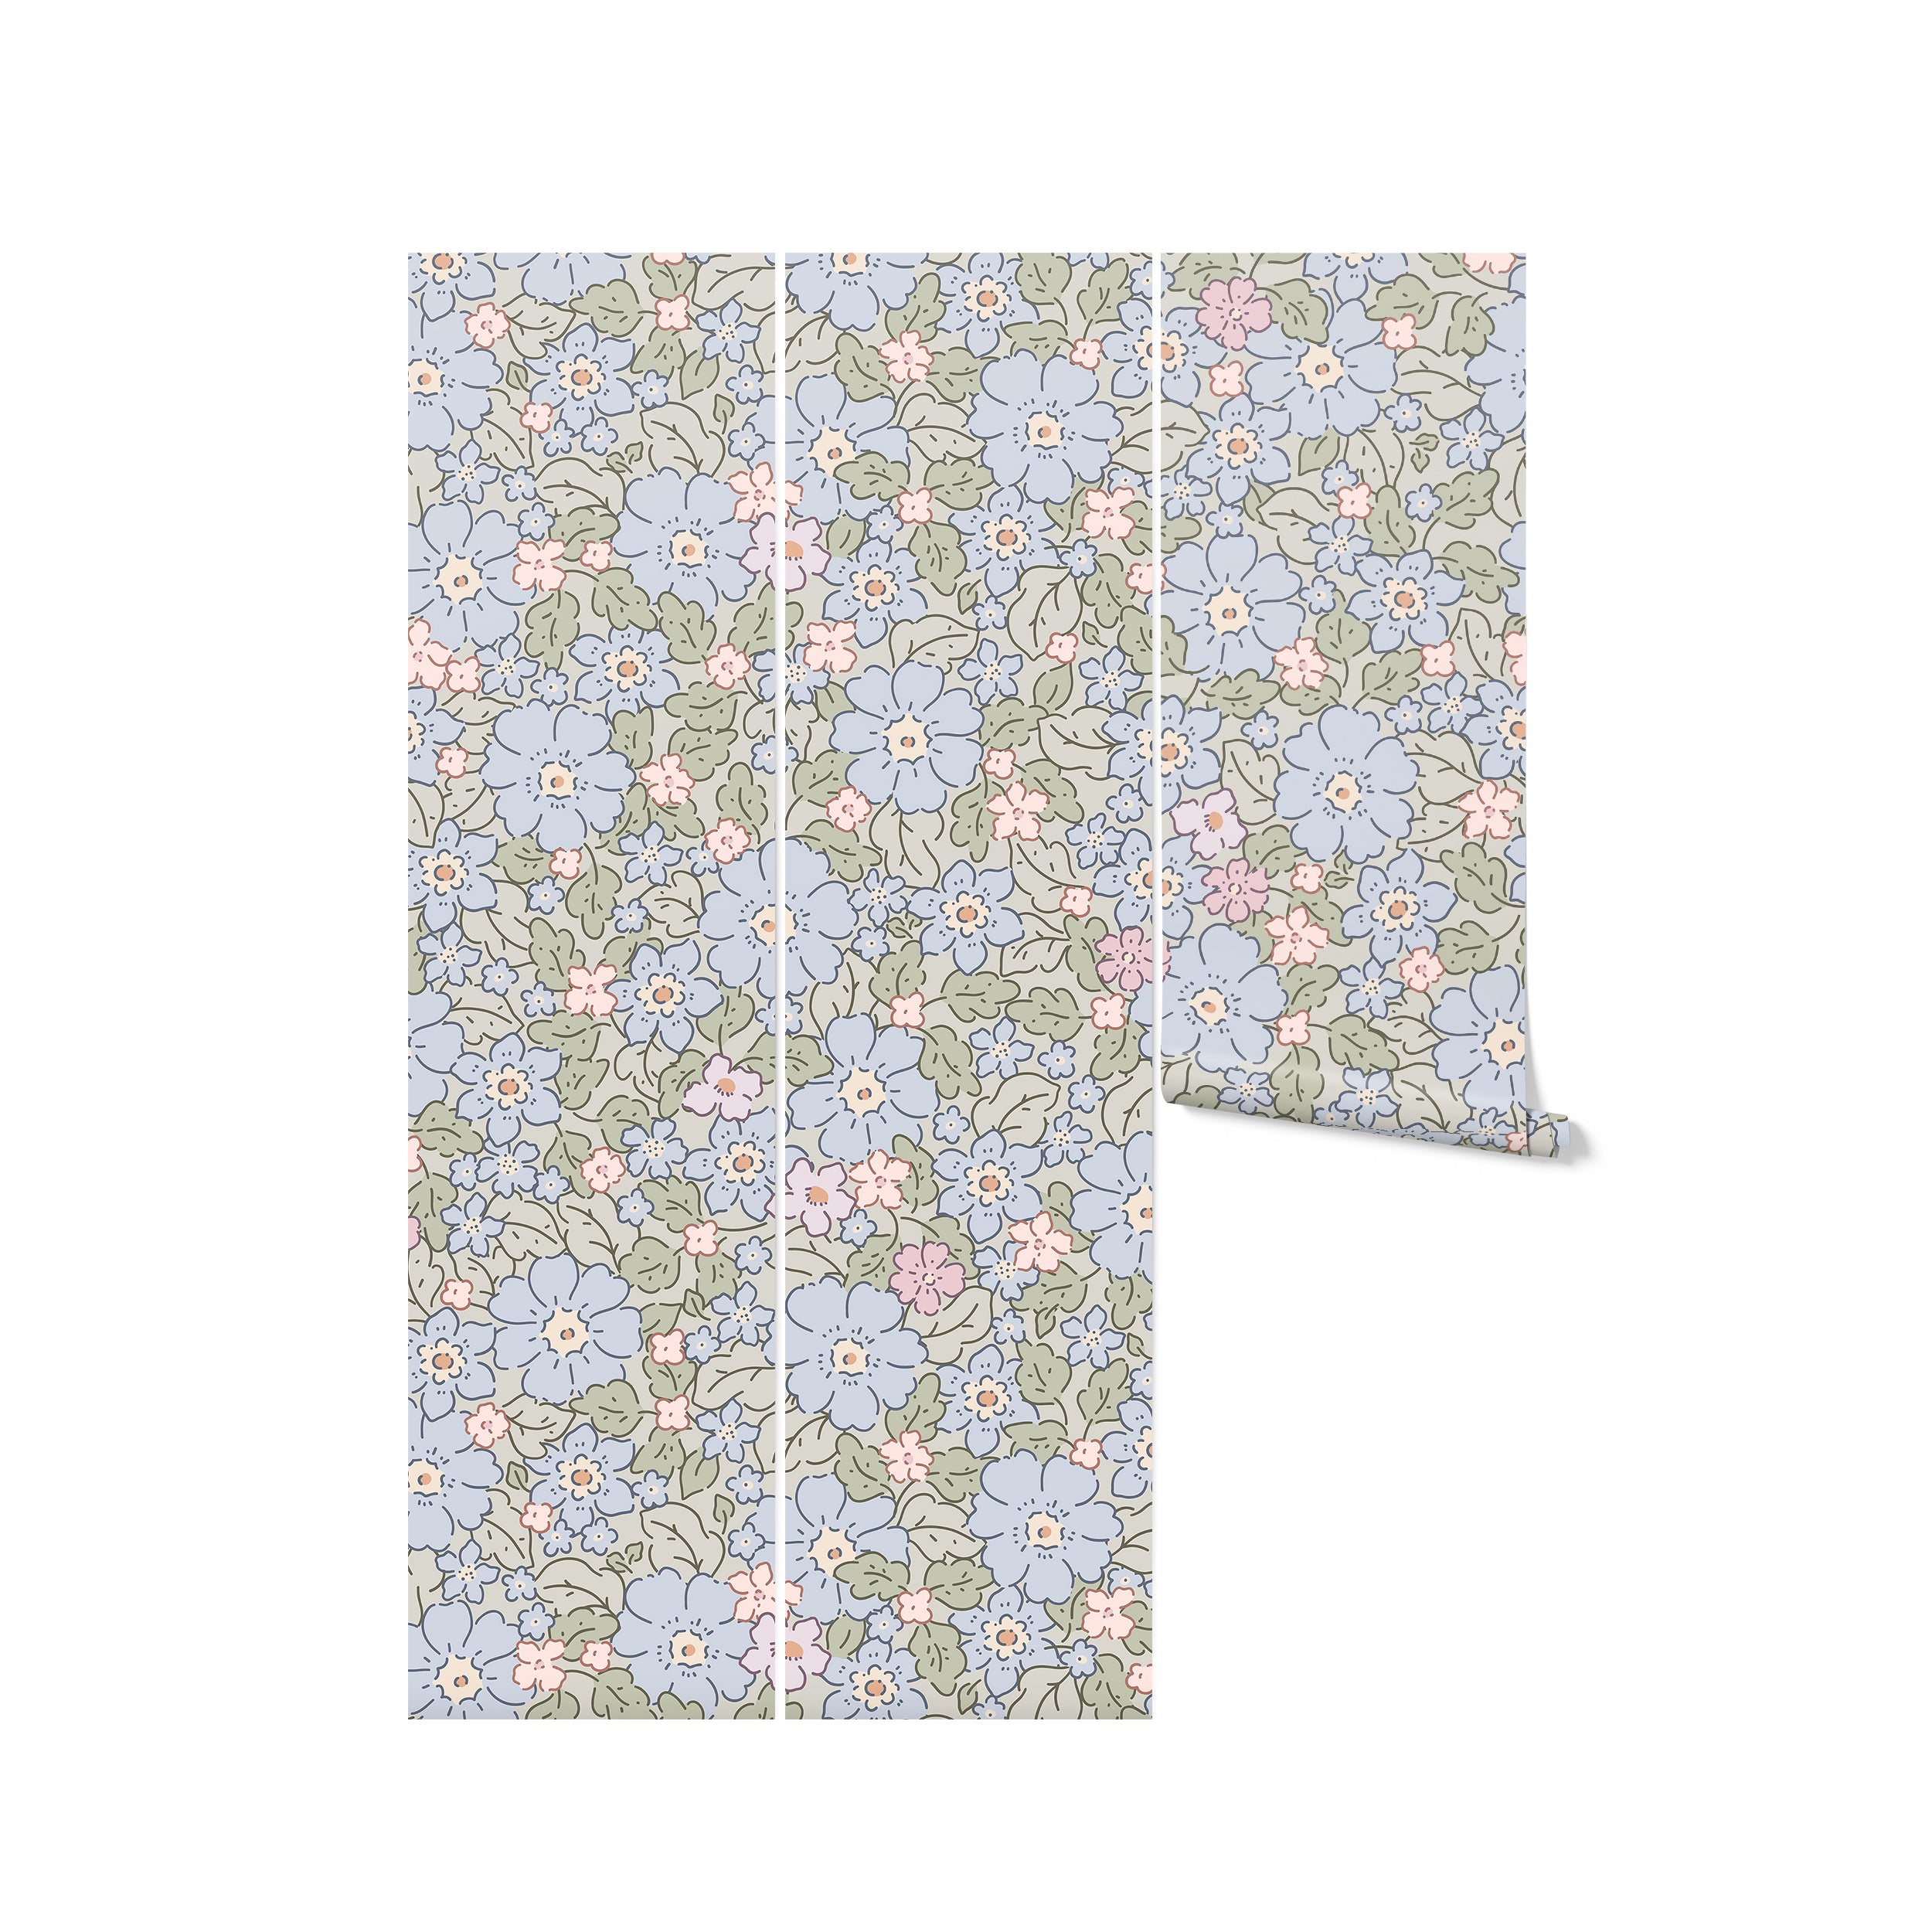 A folded display of Joie Wallpaper showing the detailed floral design in shades of blue, pink, and green on a light green base. This wallpaper brings a delightful touch of nature and color, suitable for enhancing any room with its charming and lively floral motif.